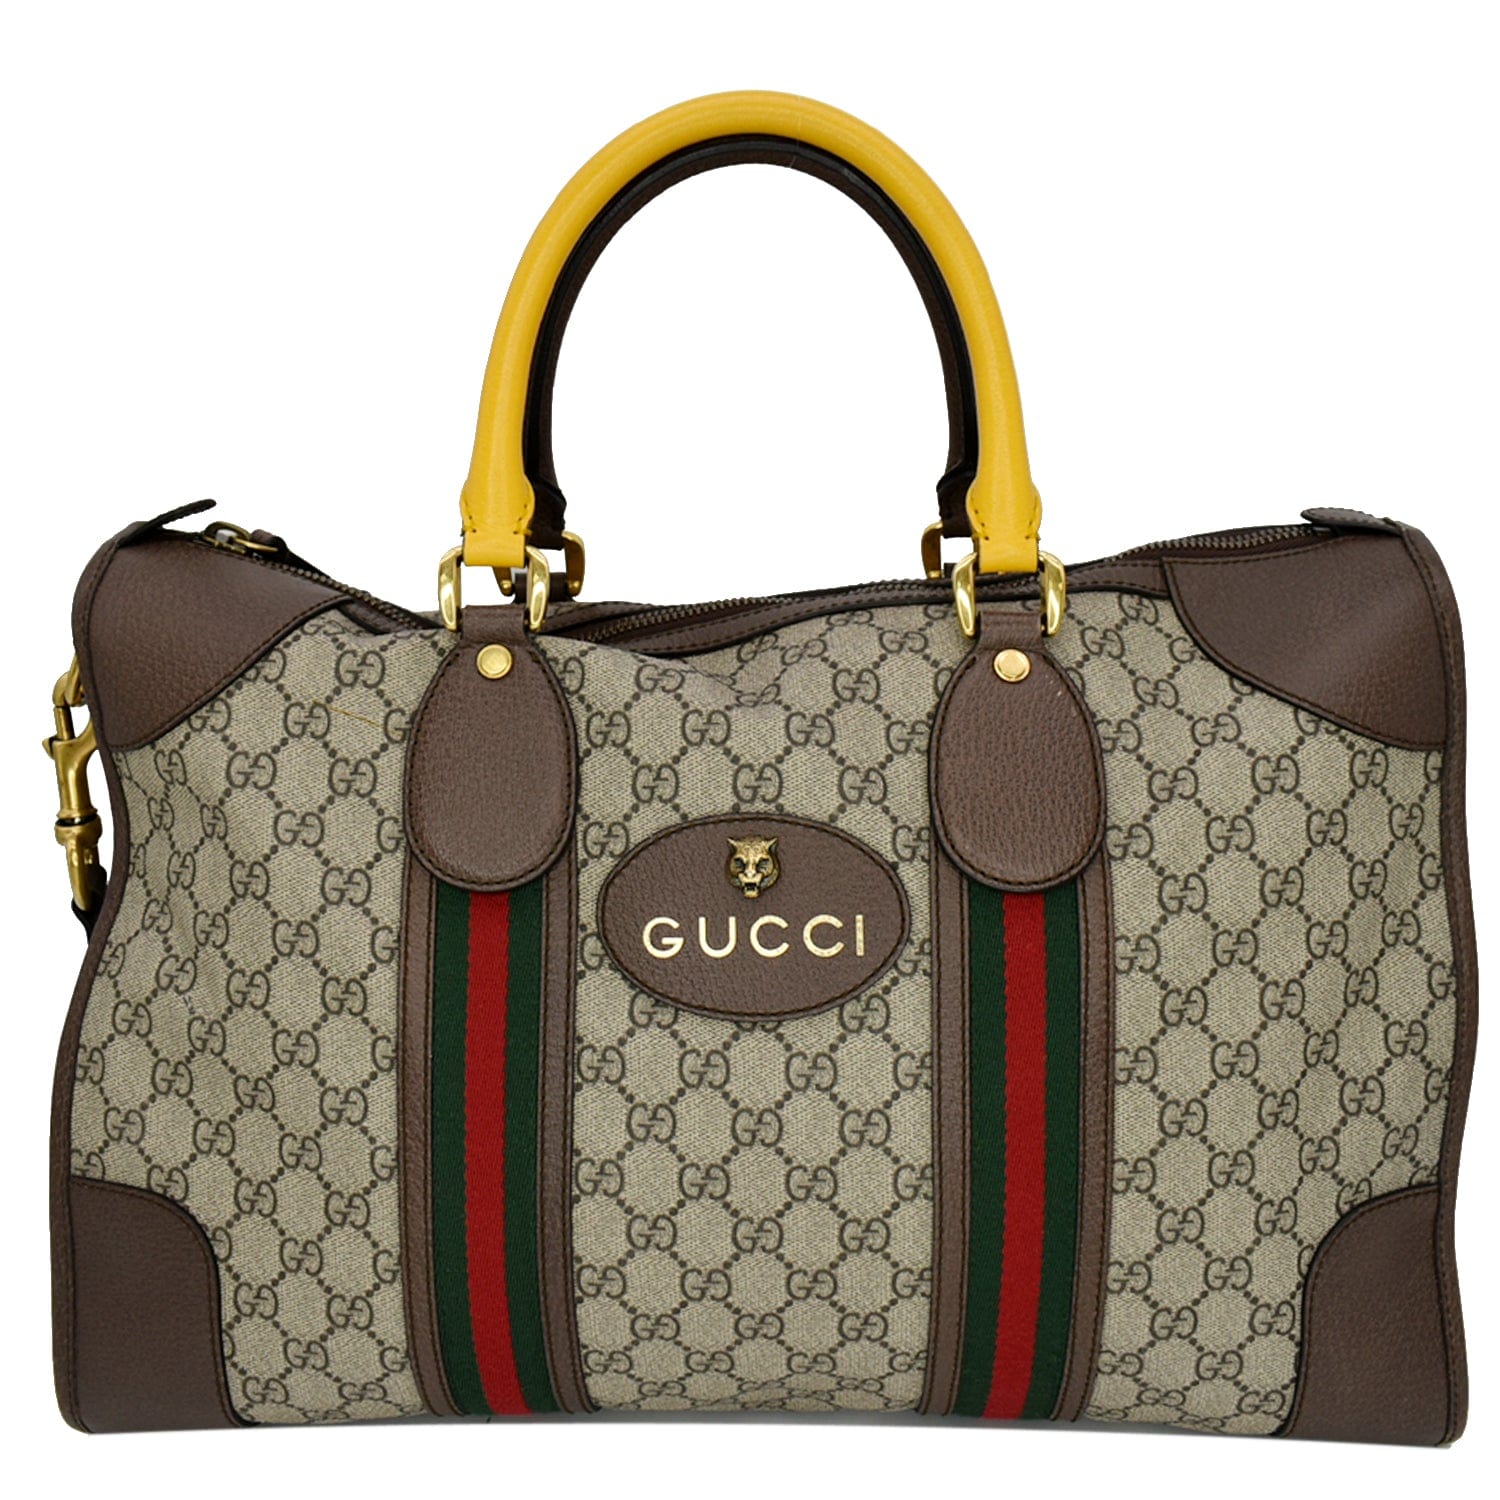 Gucci Soft Gg Supreme Web-detail Duffle Bag in Red